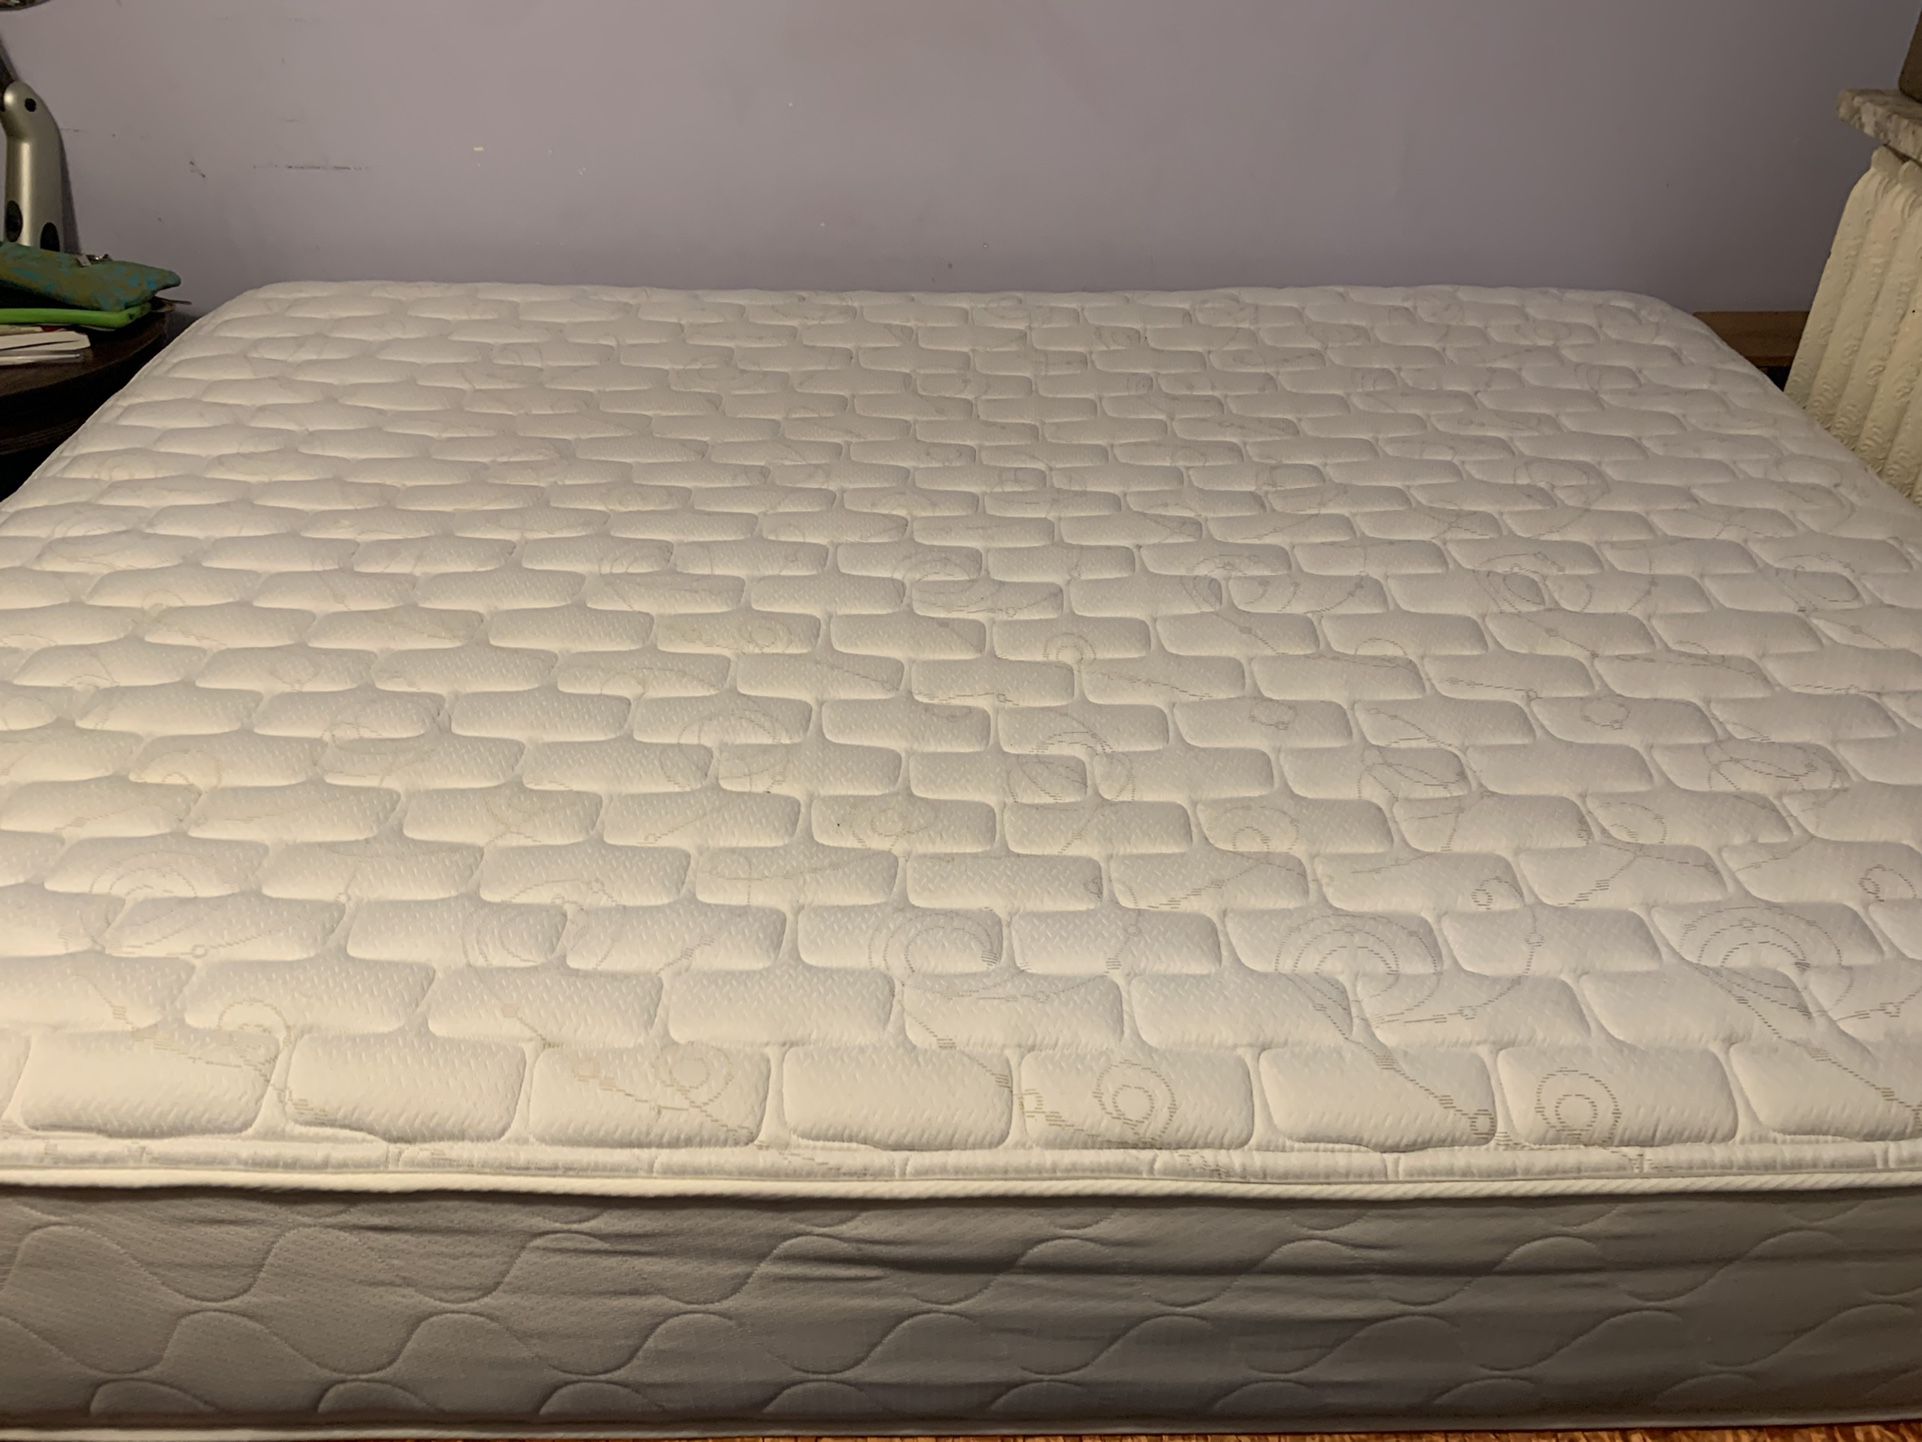 Queen size mattress in great condition want it gone today was over 800 bucks